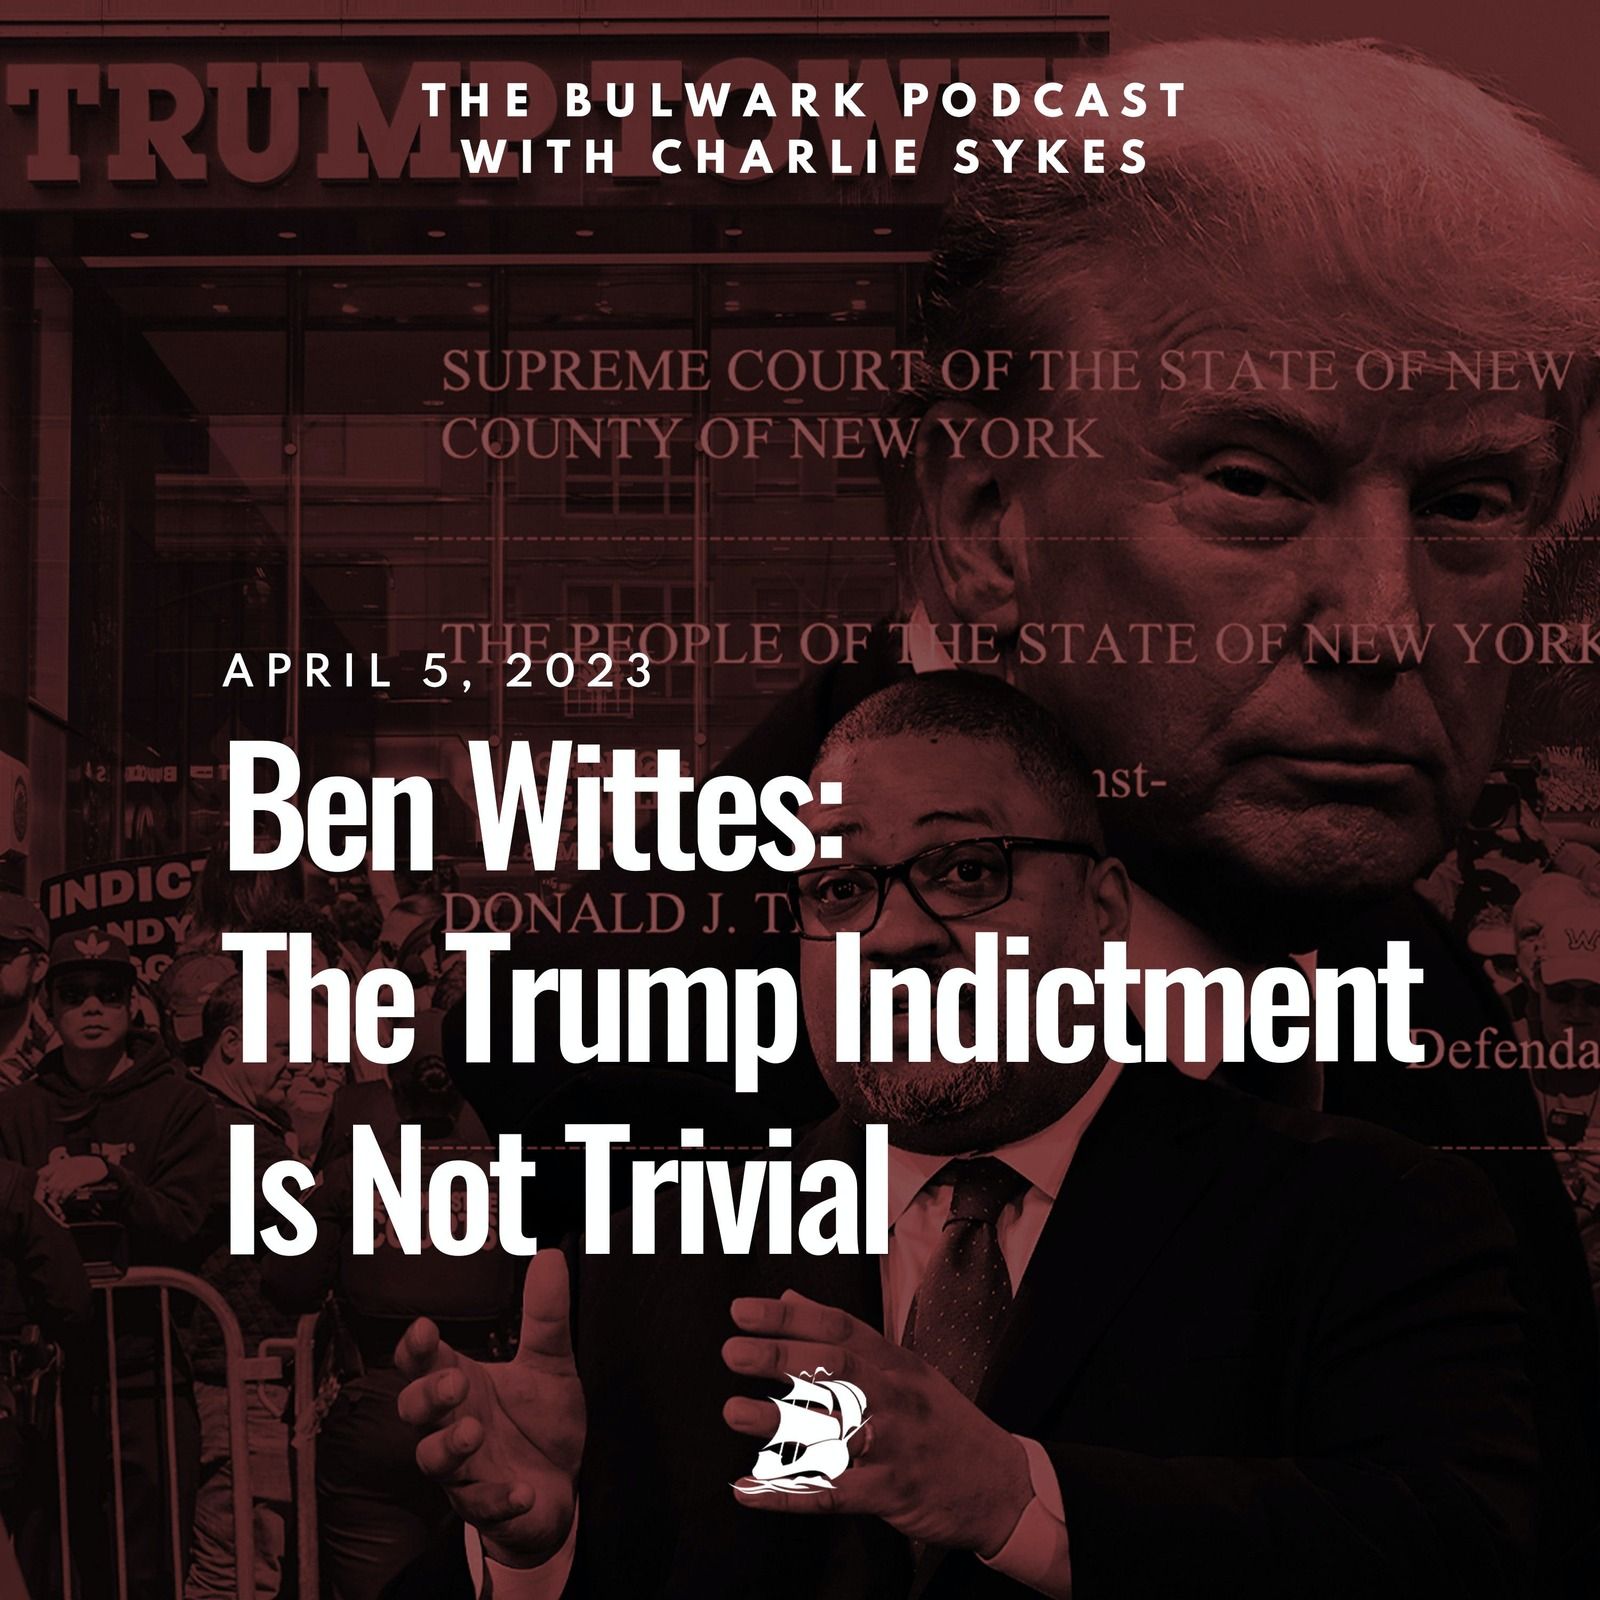 Ben Wittes: The Trump Indictment Is Not Trivial